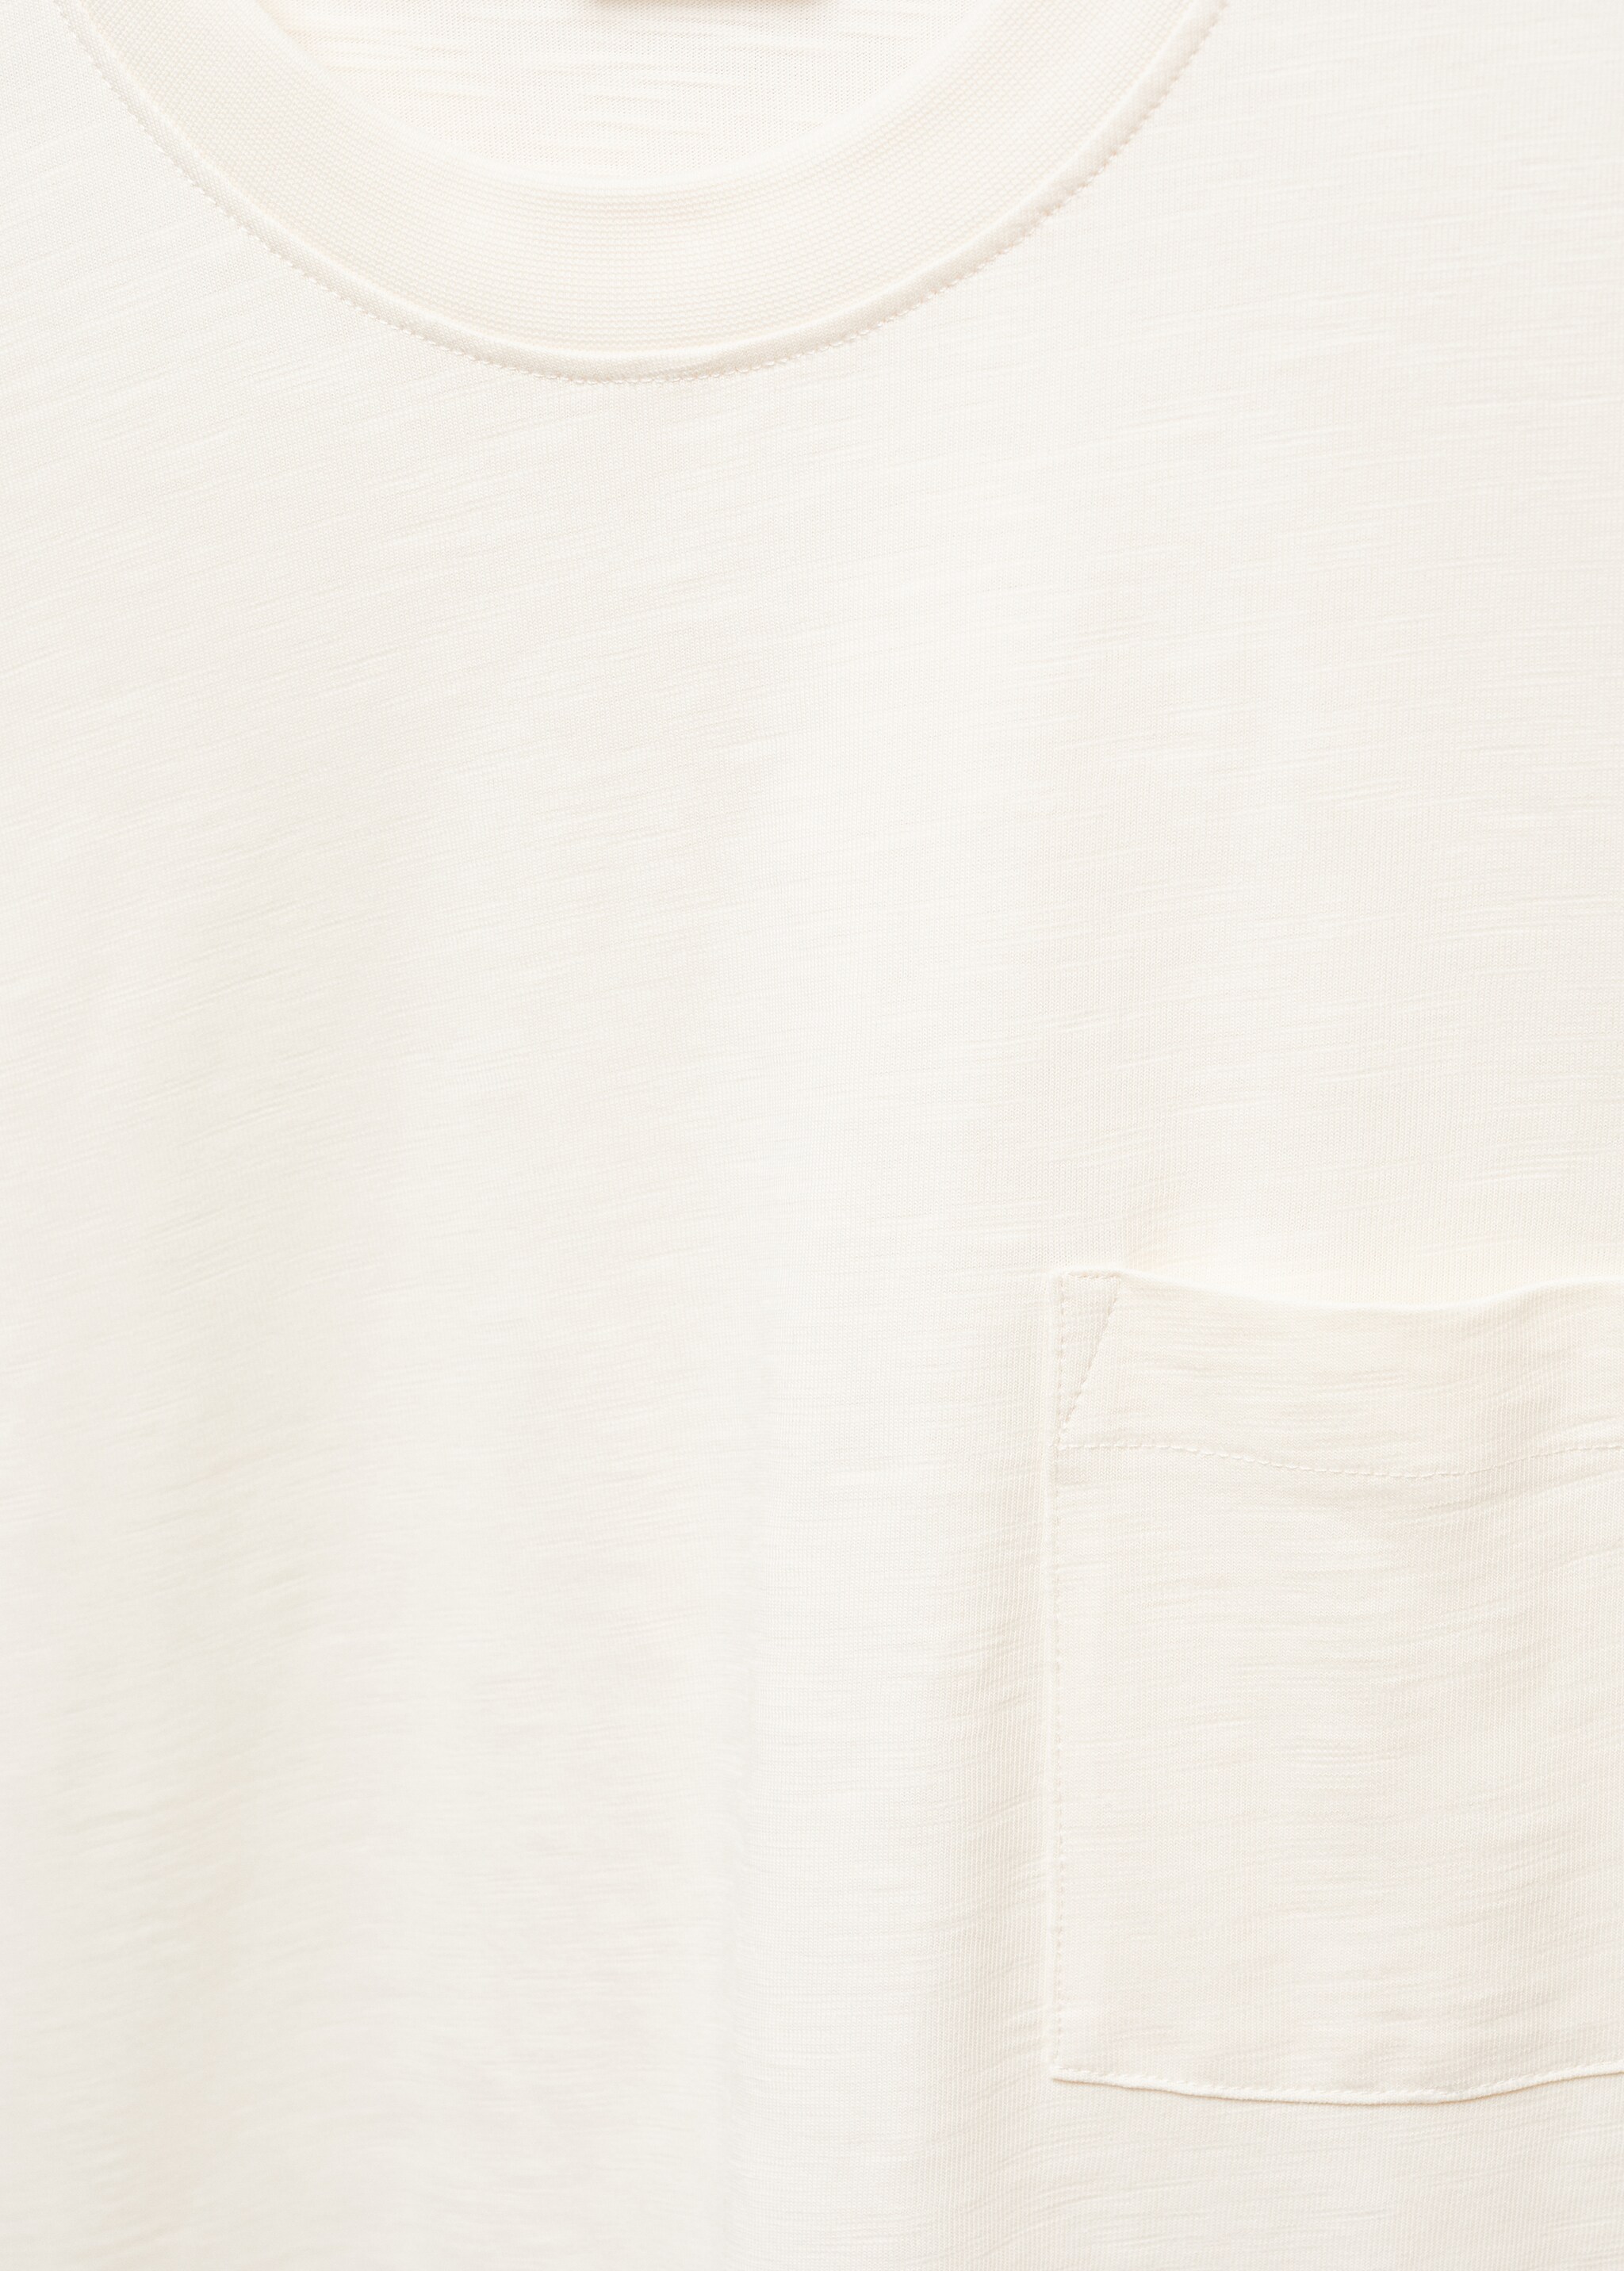 100% cotton t-shirt with pocket - Details of the article 8